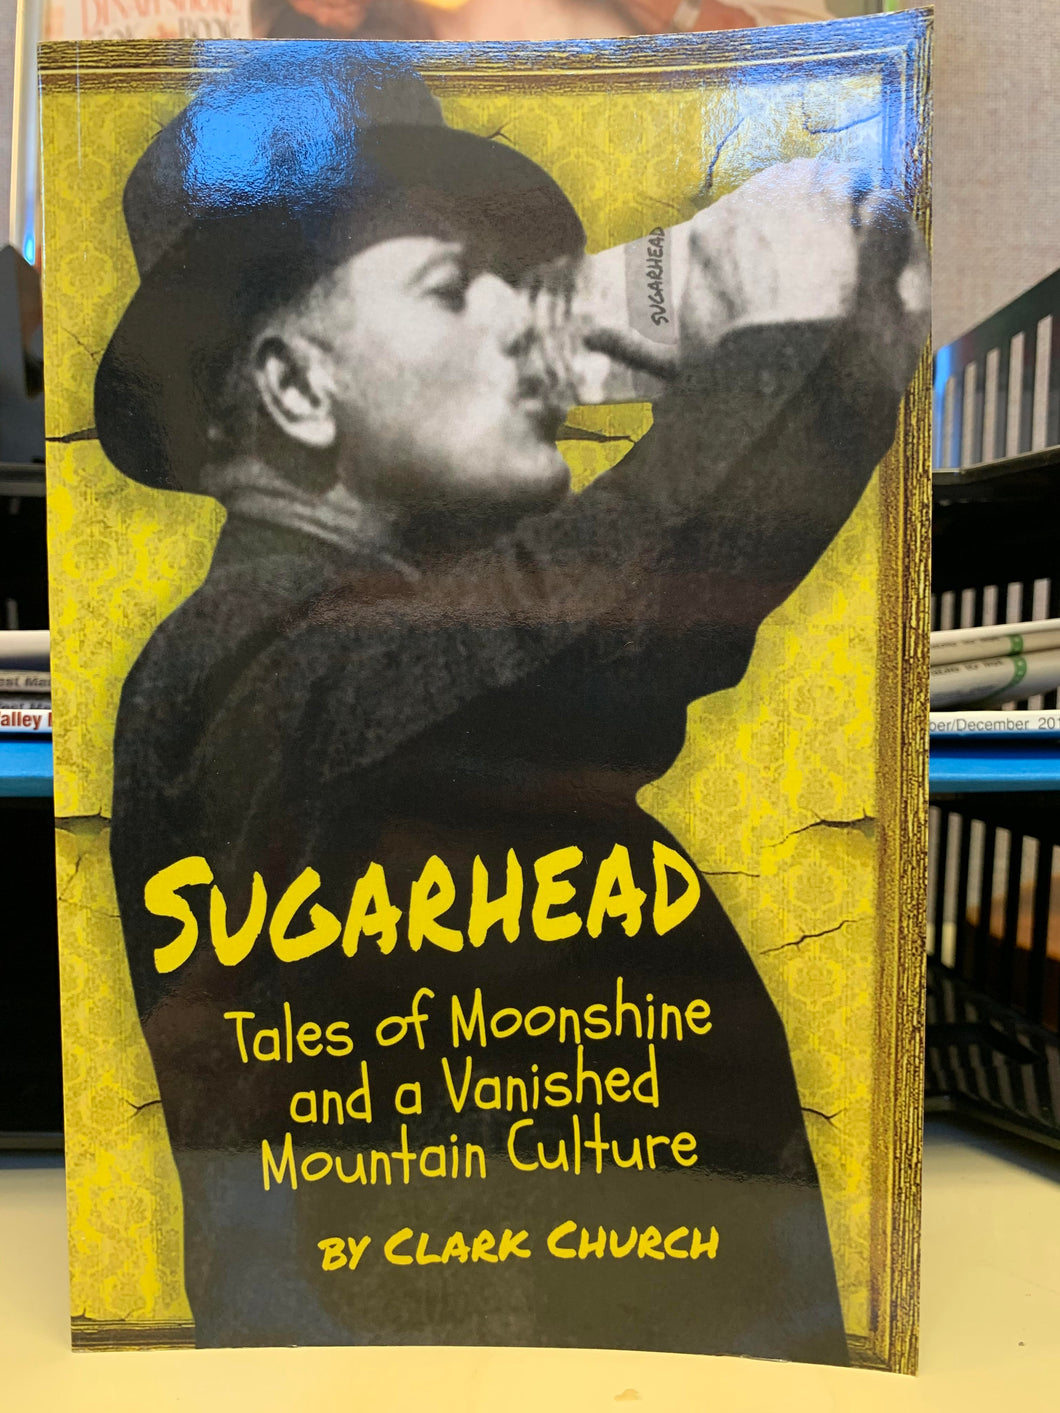 Sugarhead: Tales of Moonshine and a Vanished Mountain Culture by Clark Church